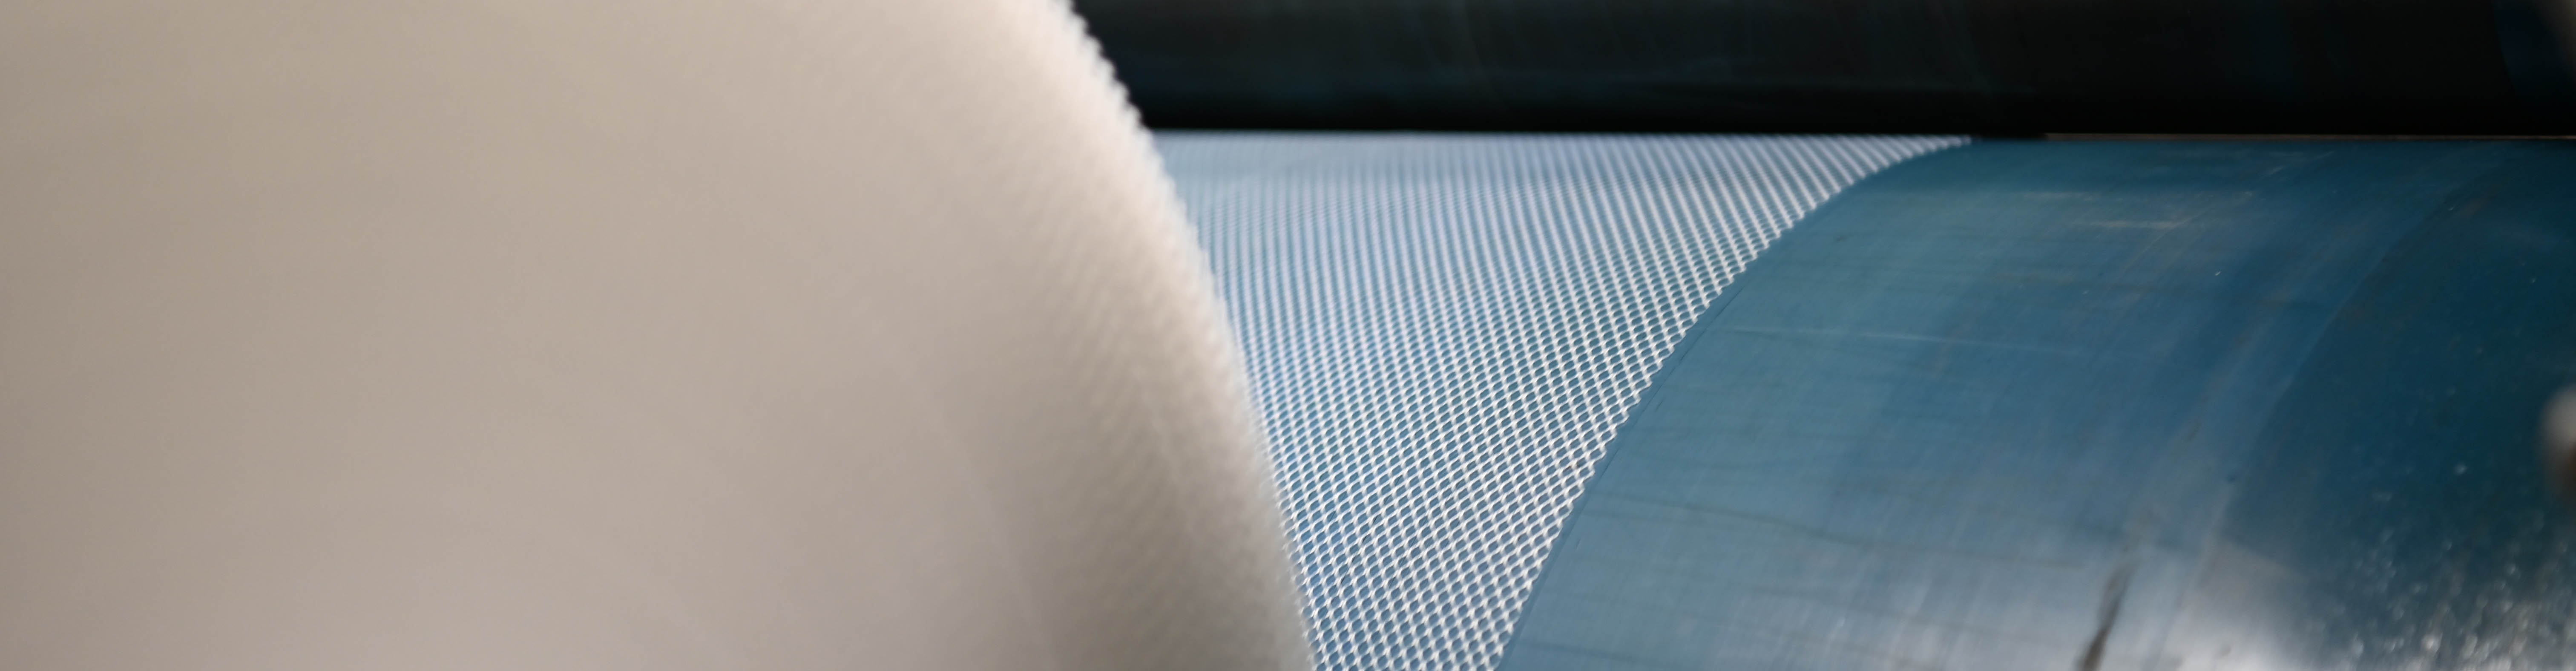 Meltblown nonwoven for fine, highly efficient filter media